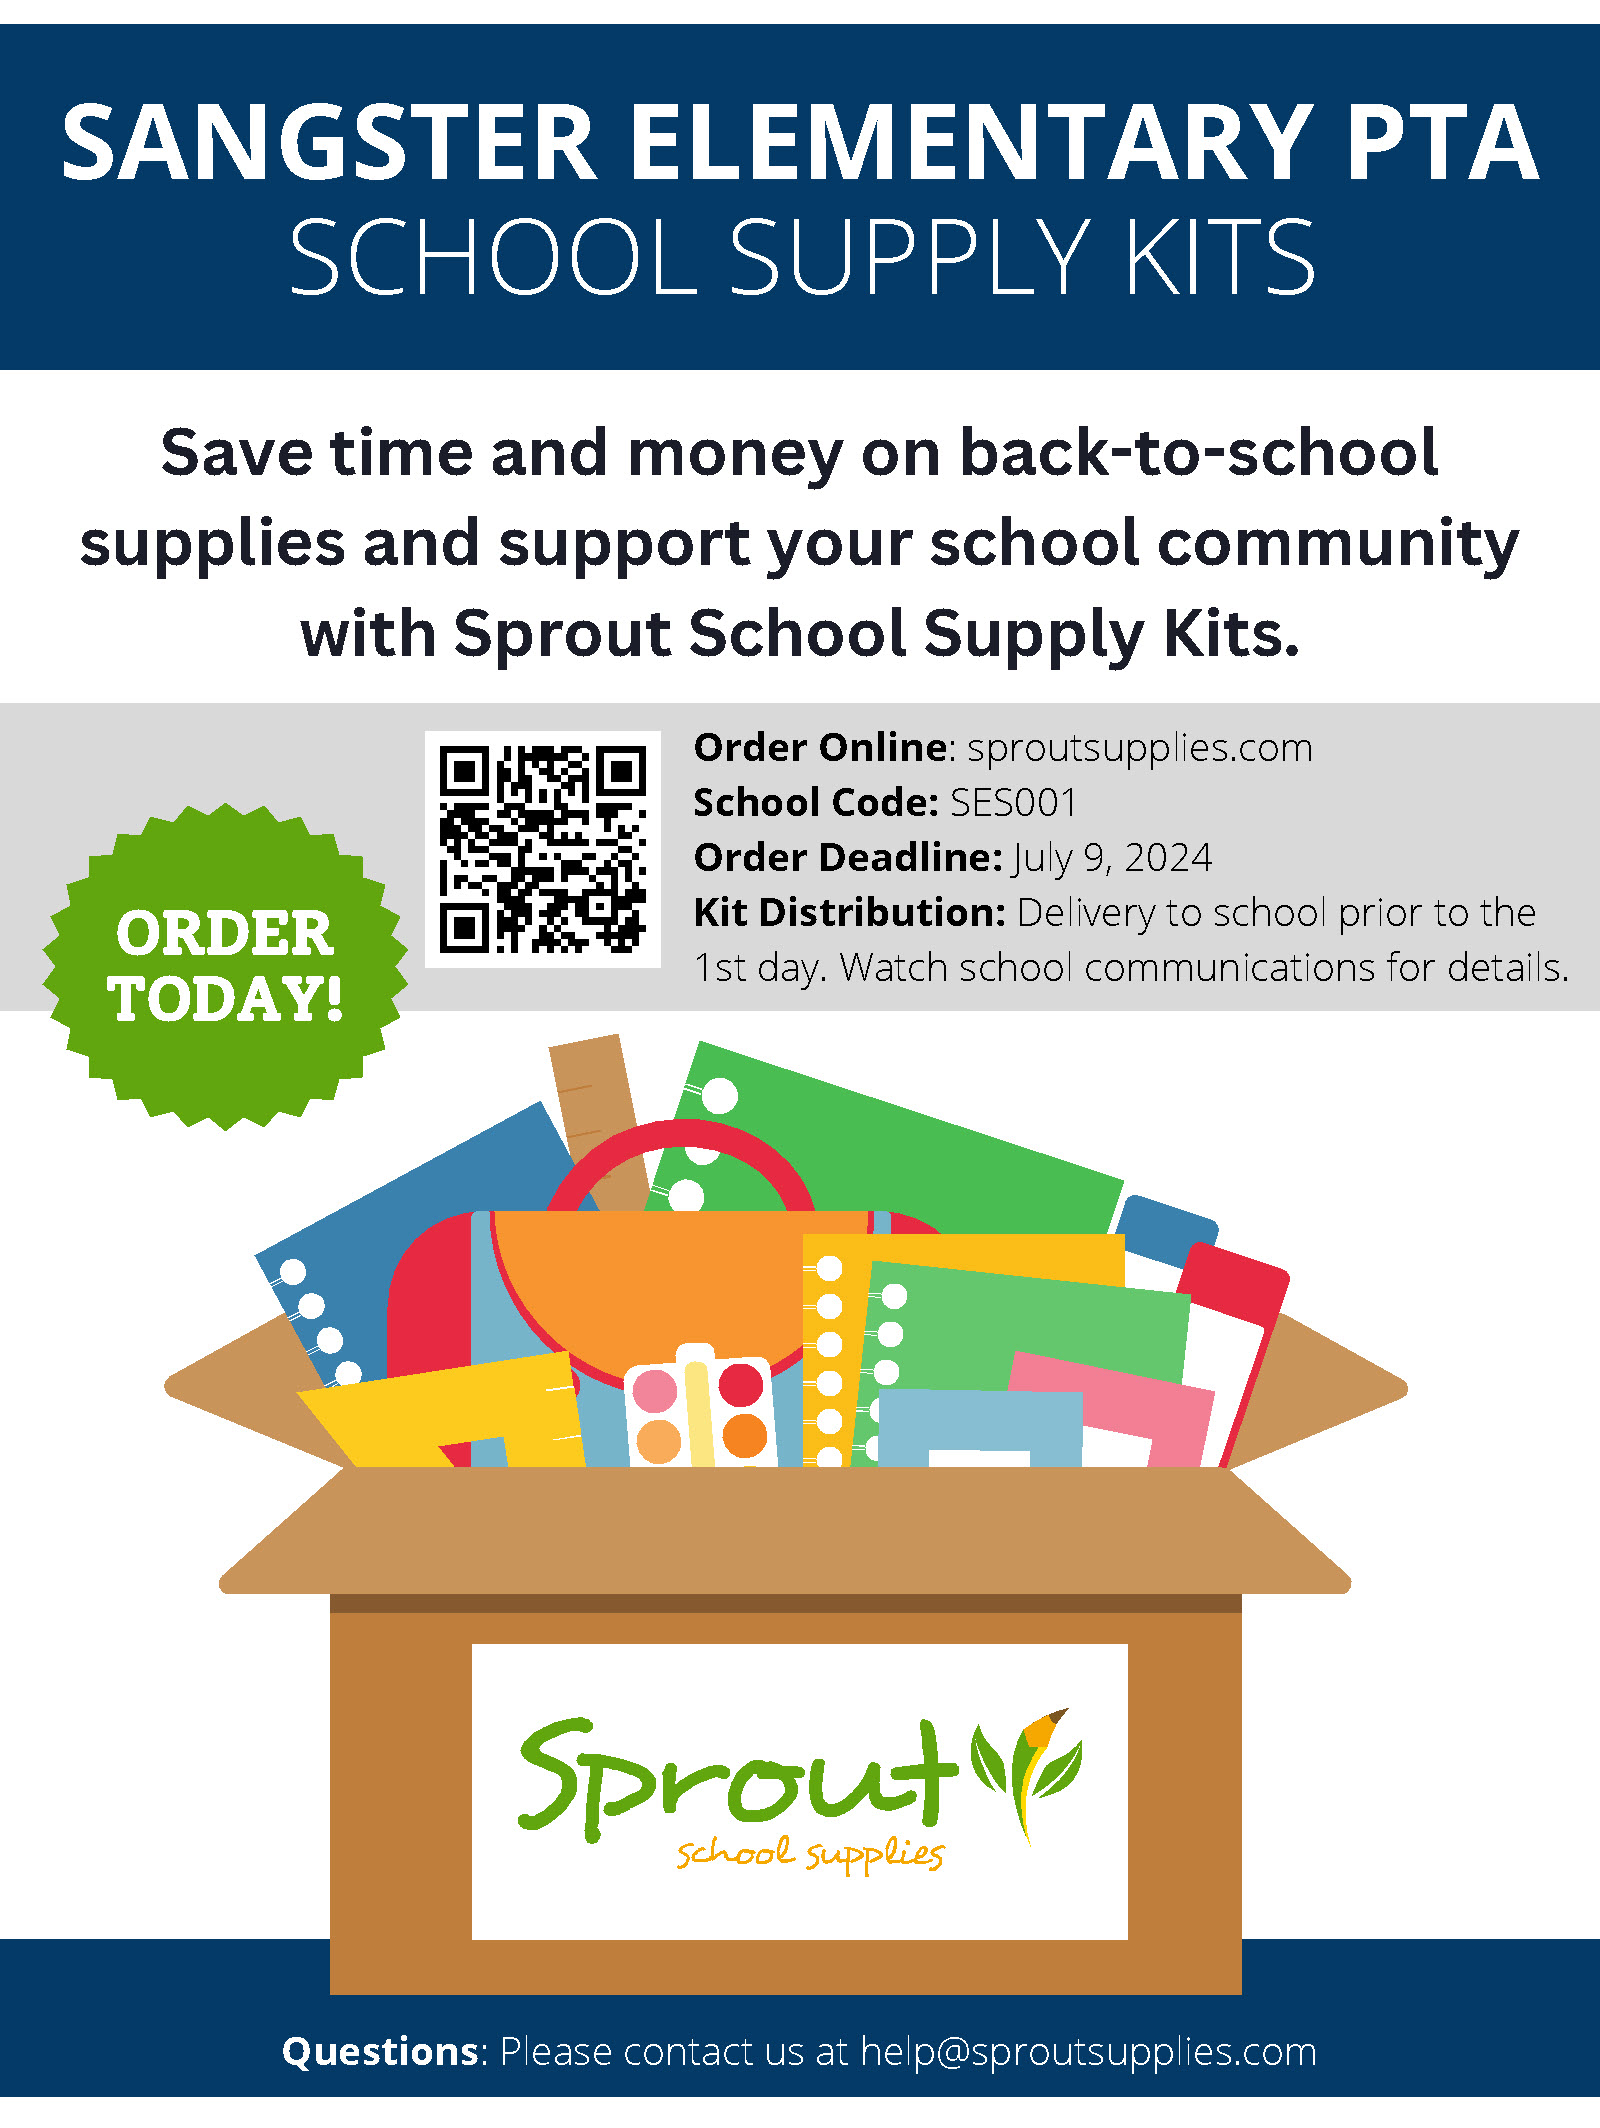 SANGSTER ELEMENTARY PTA  Save time and money on back-to-school supplies and support your school community  with Sprout School Supply Kits. Order online at sproutsupplies.com school code SES001. Order deadline is July 9, 2024. Kits will be distributed at Open House.